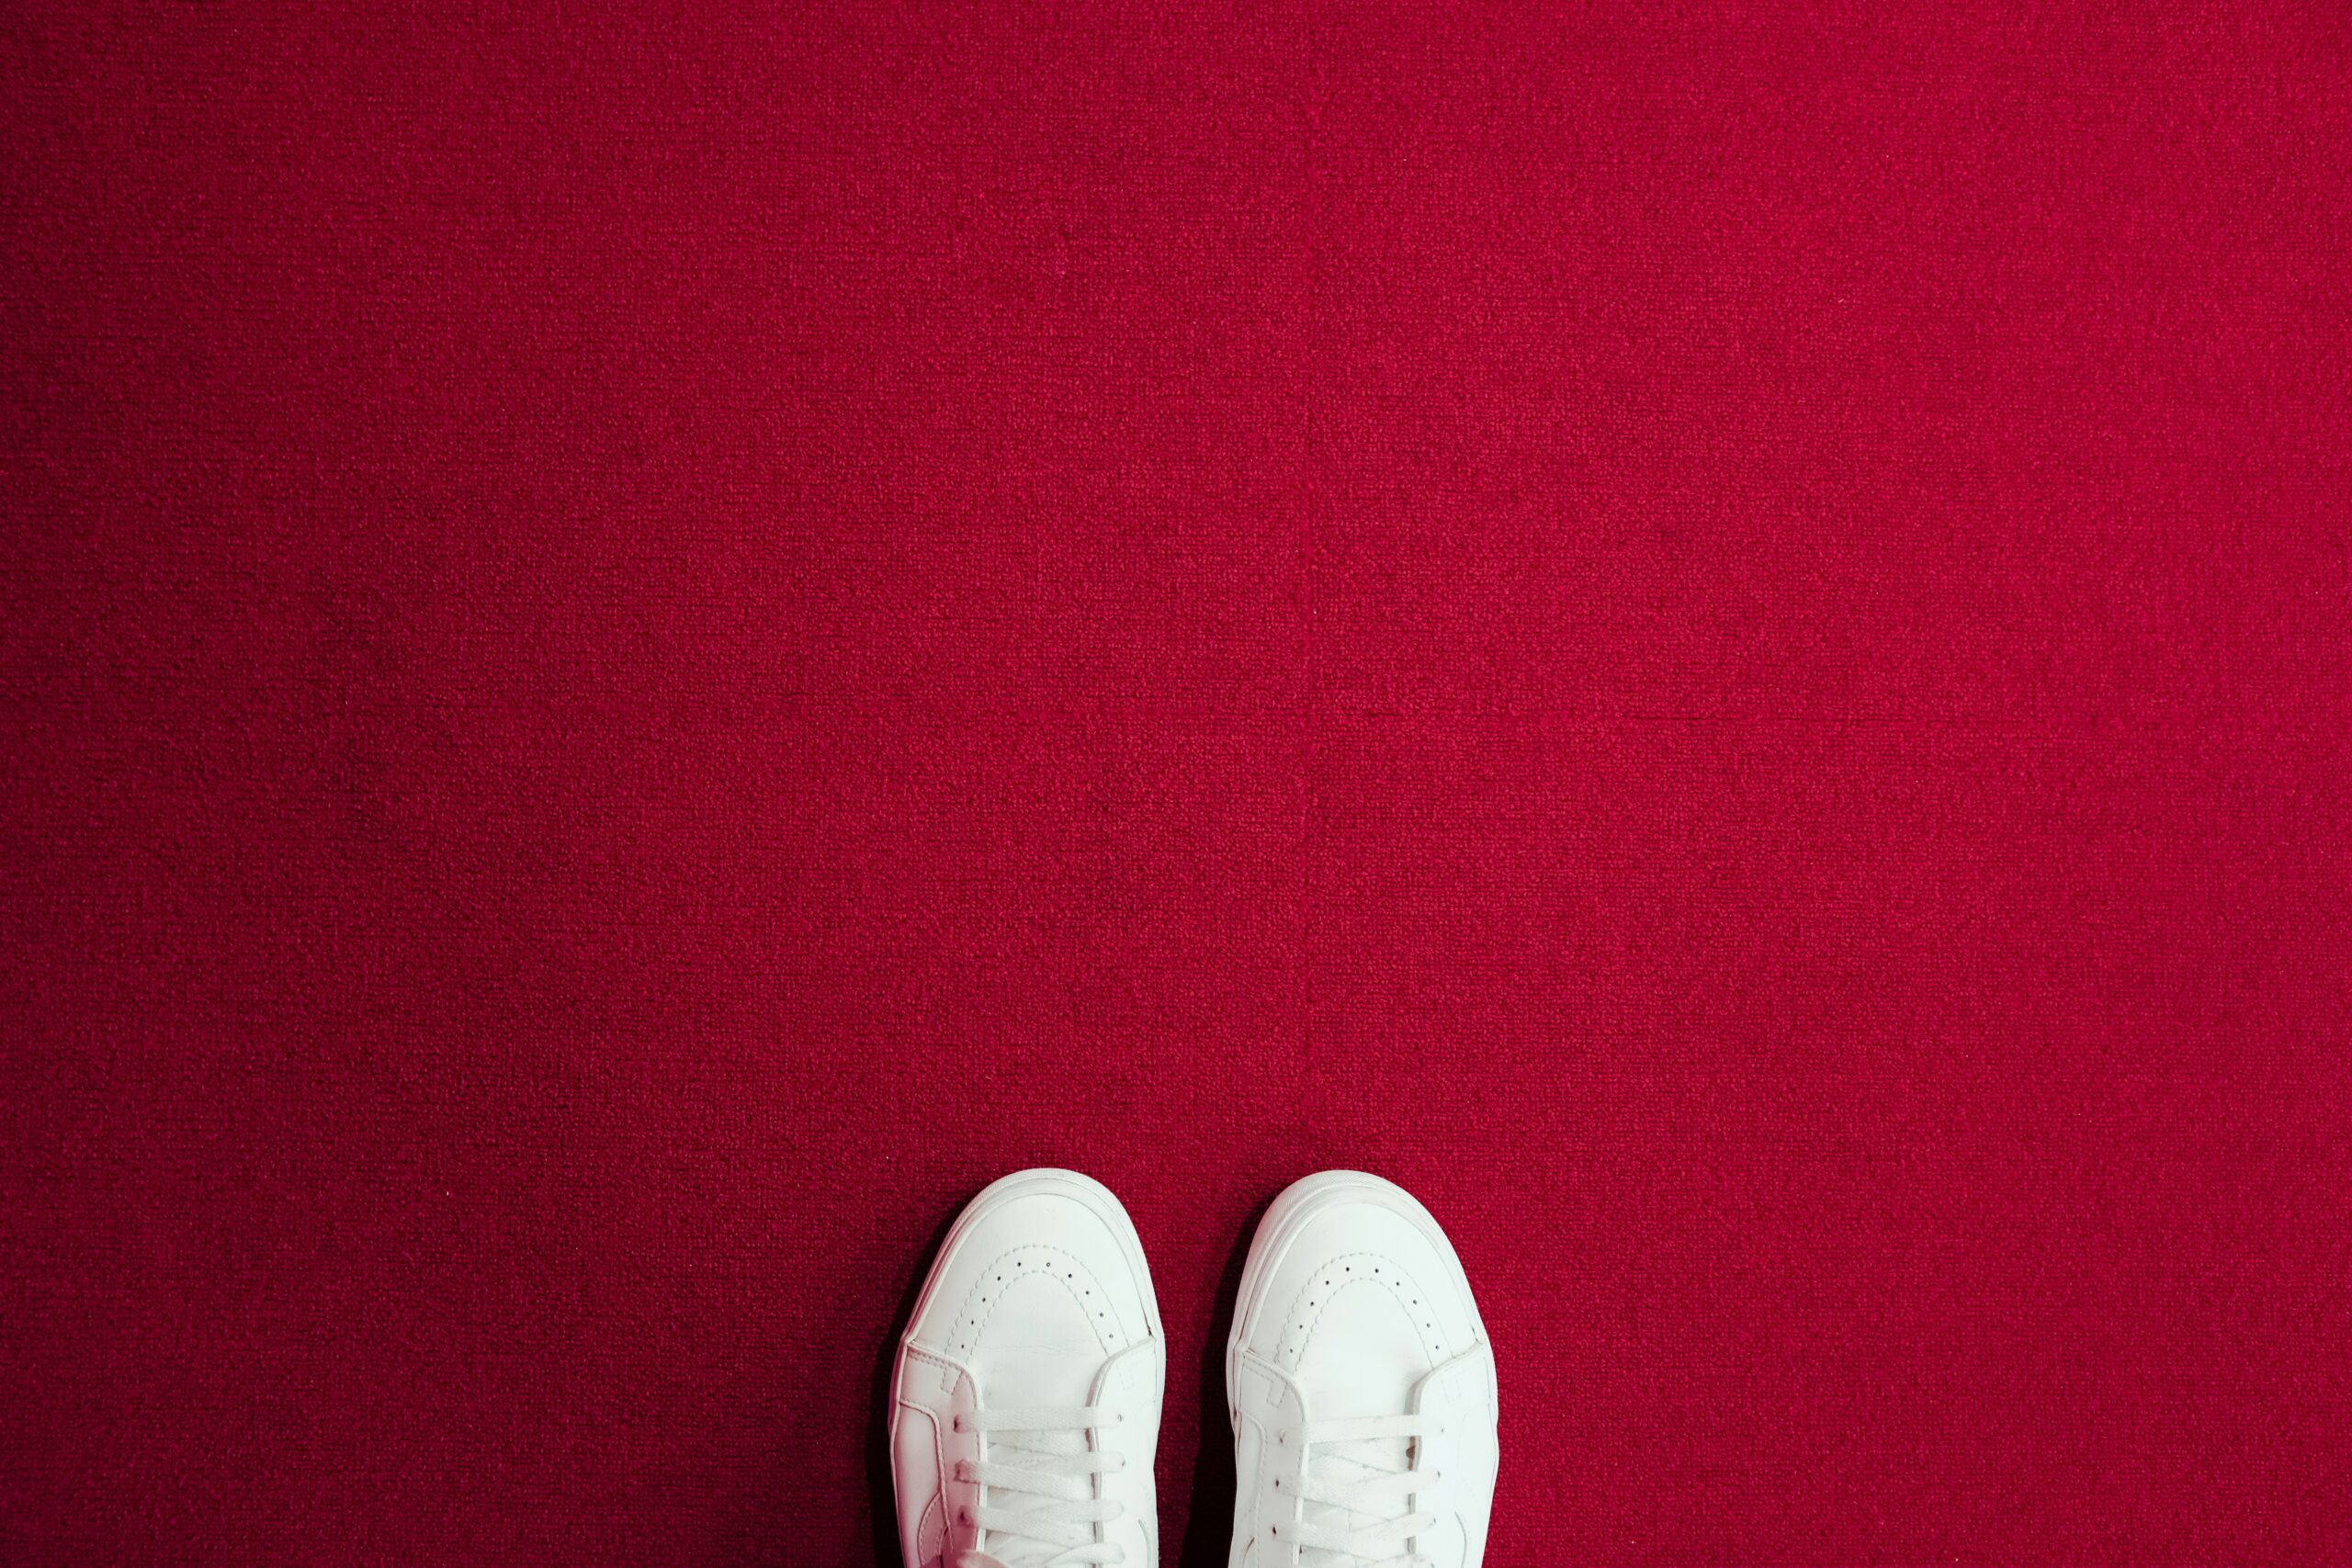 white trainers from above on a red flooring.